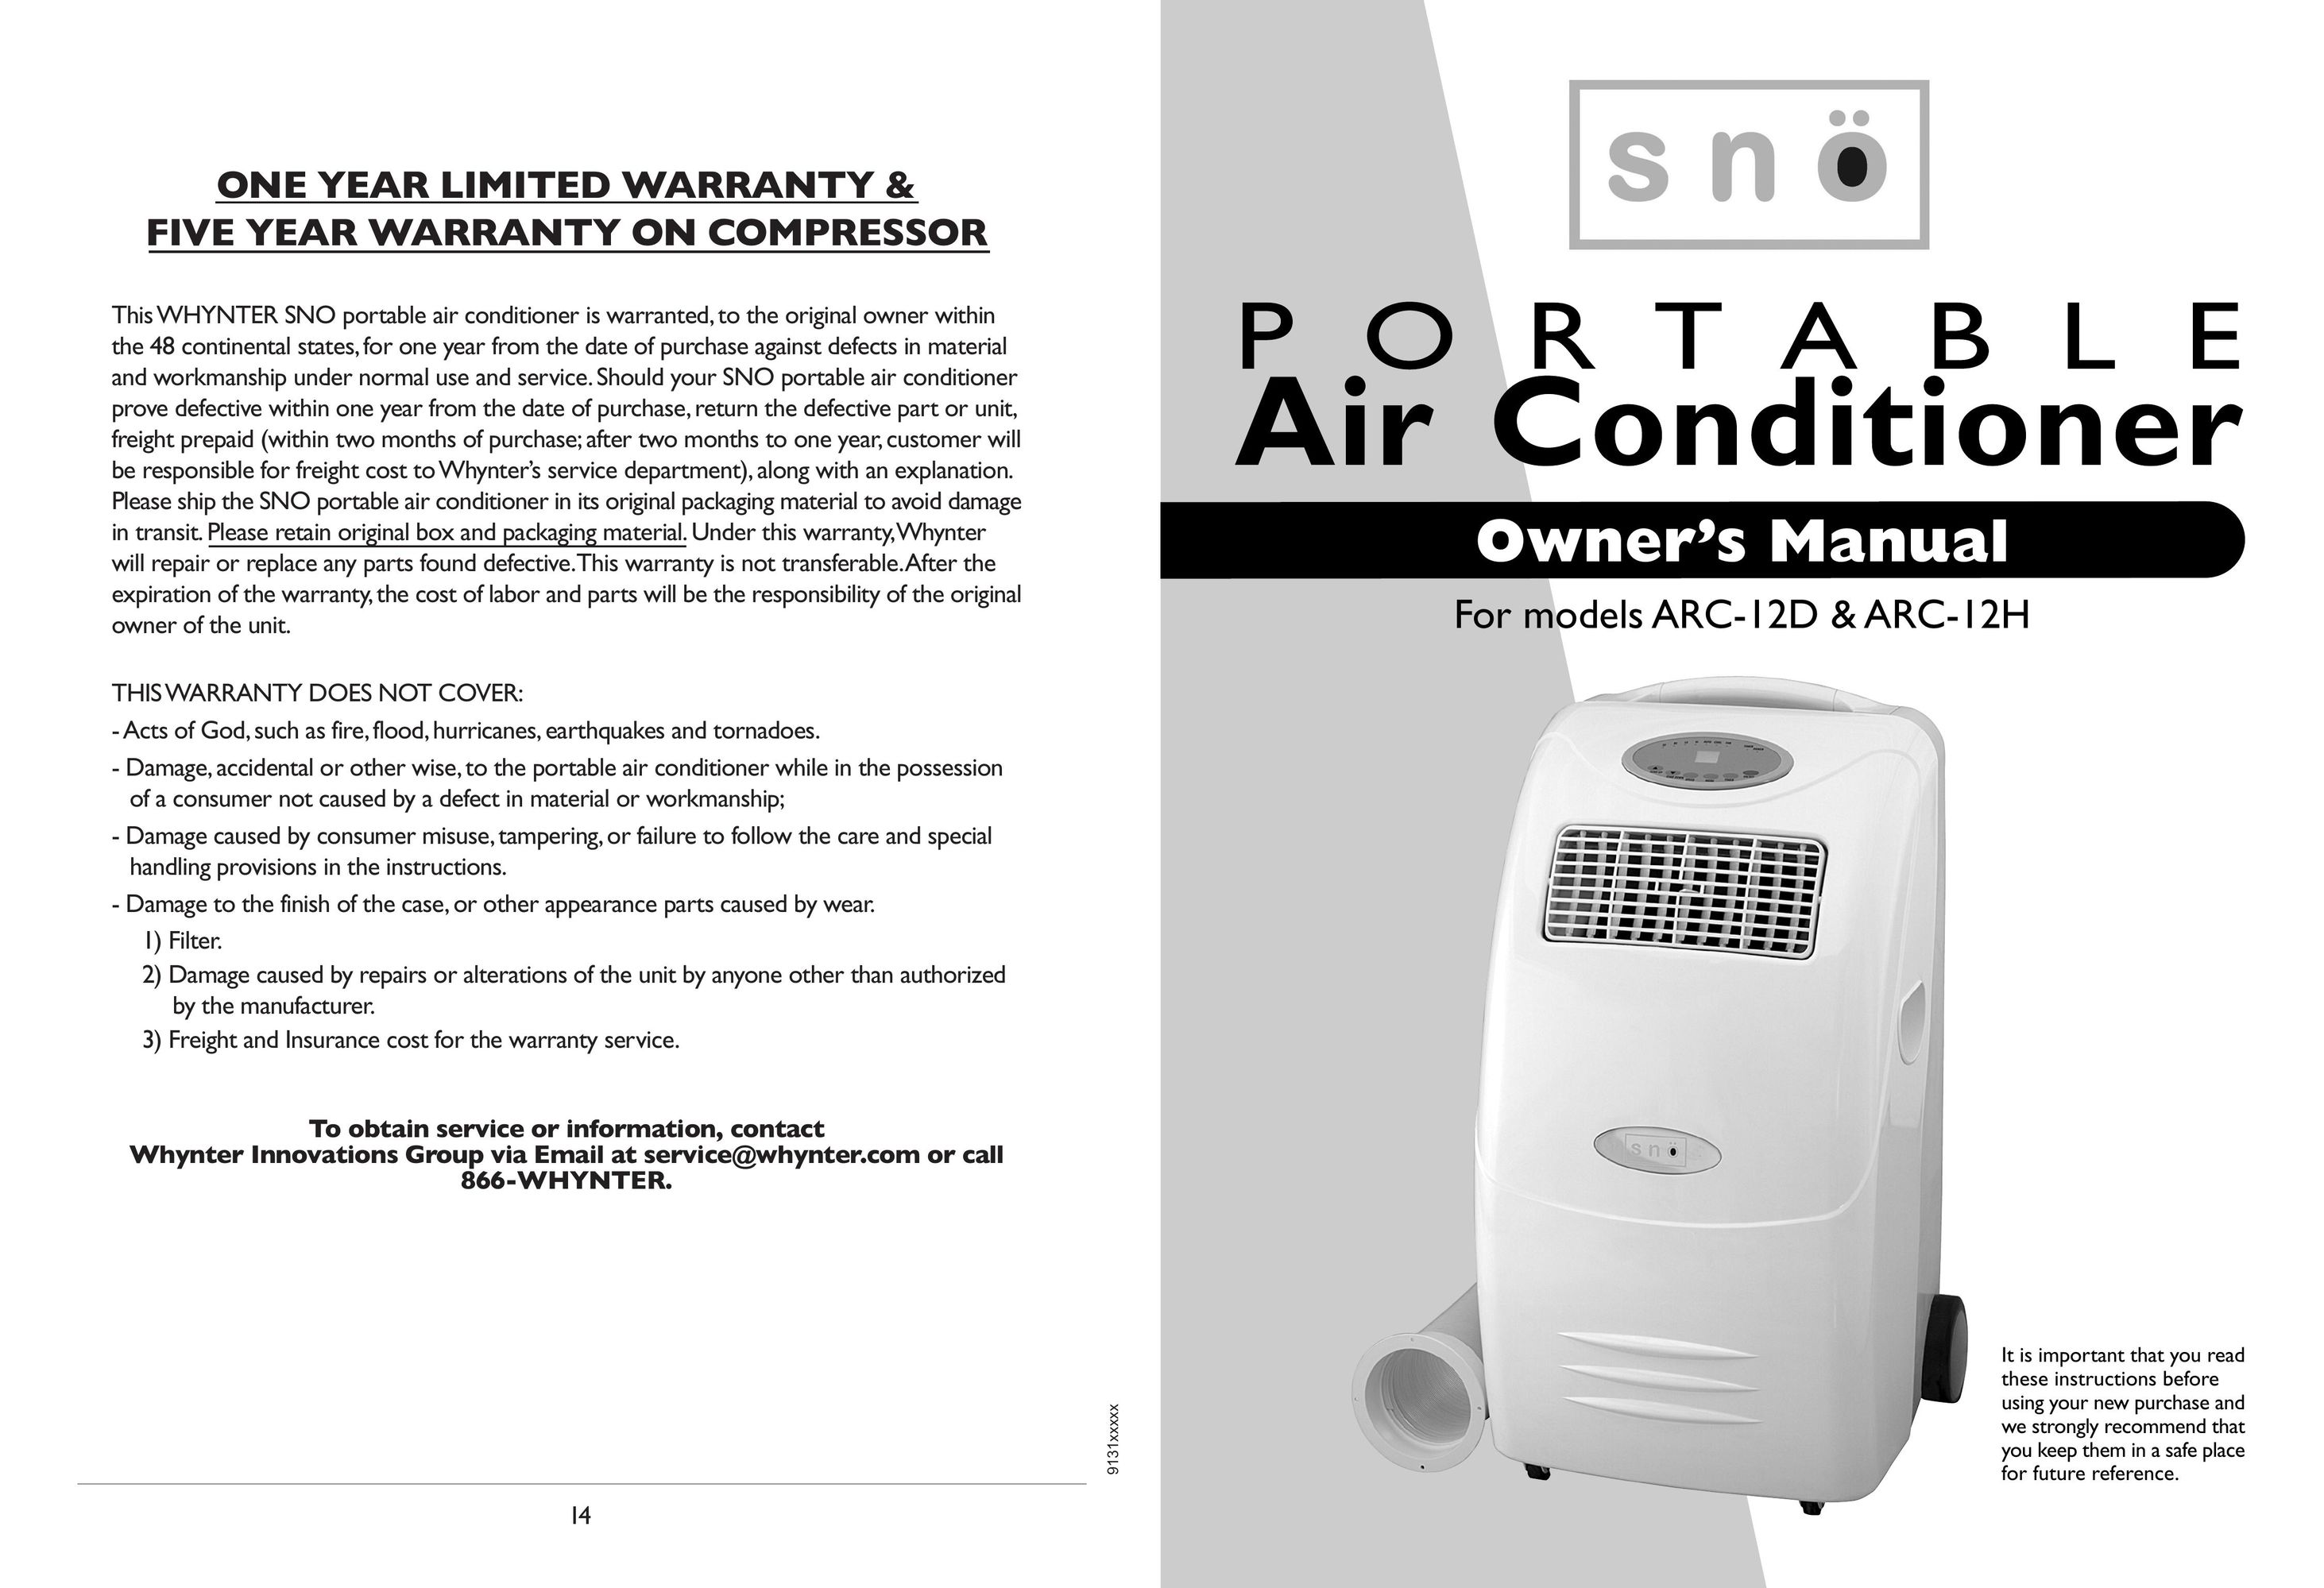 Whynter ARC-12H Air Conditioner User Manual